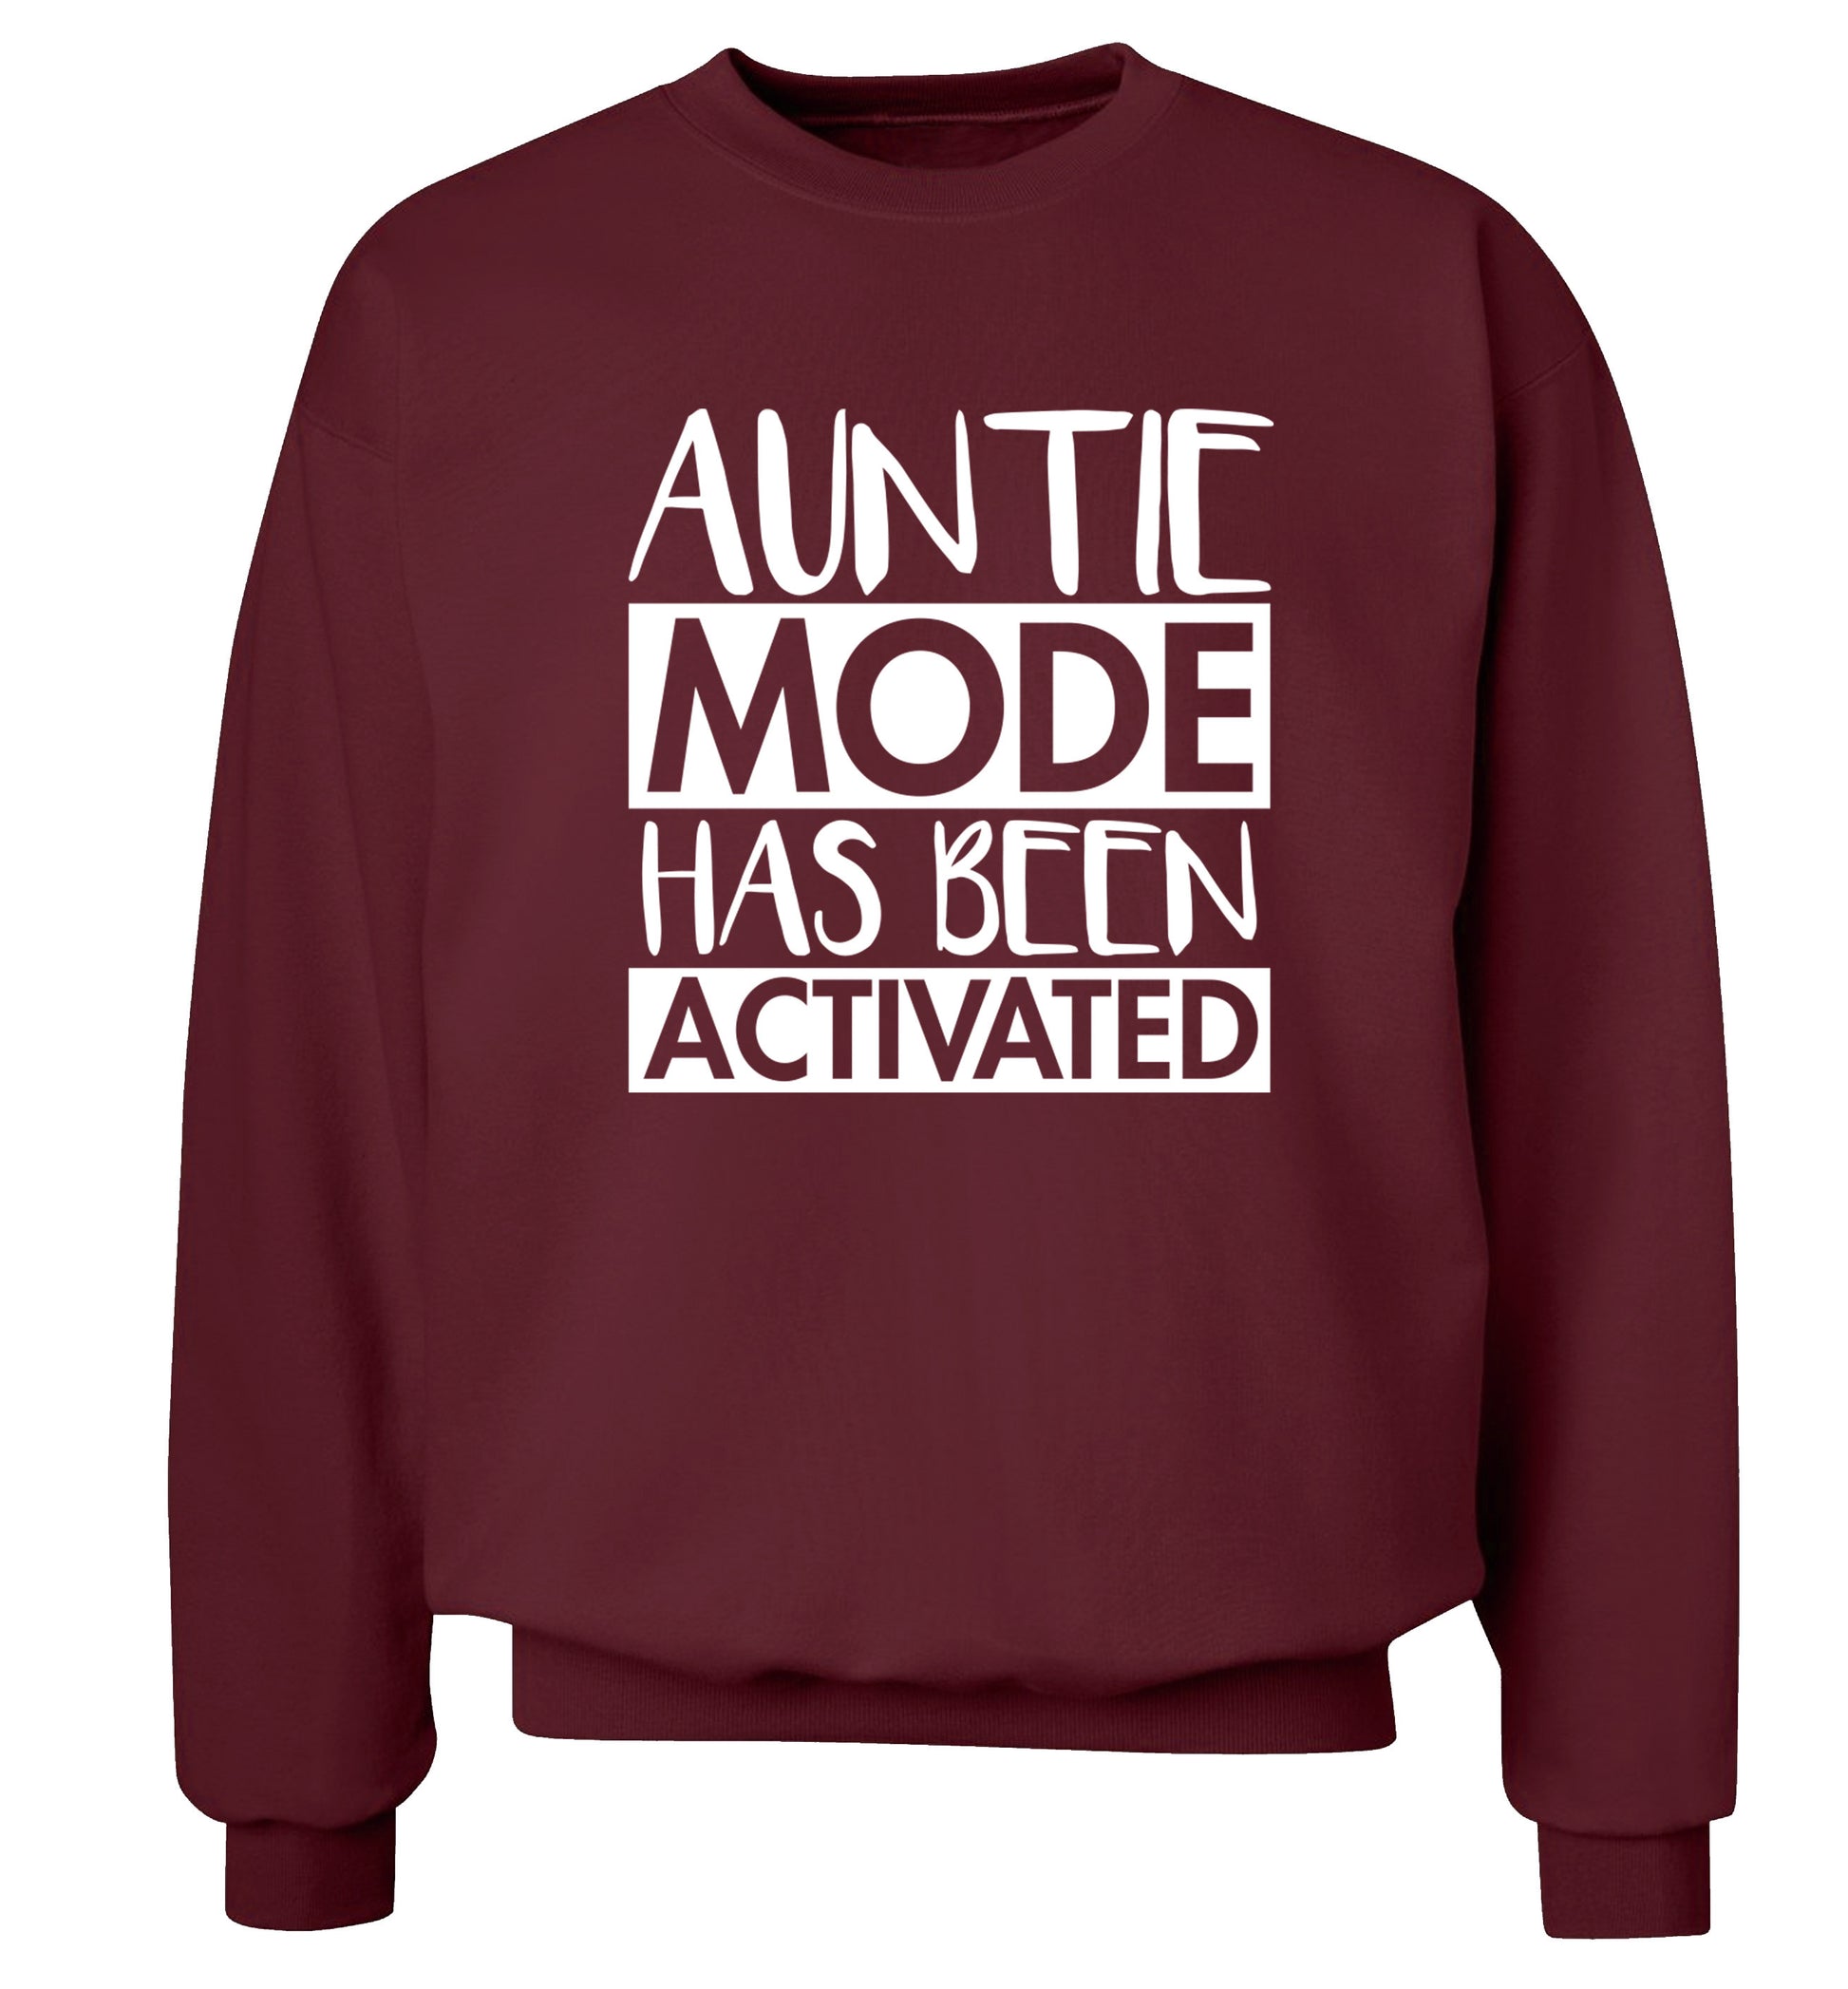 Auntie mode activated Adult's unisex maroon Sweater 2XL